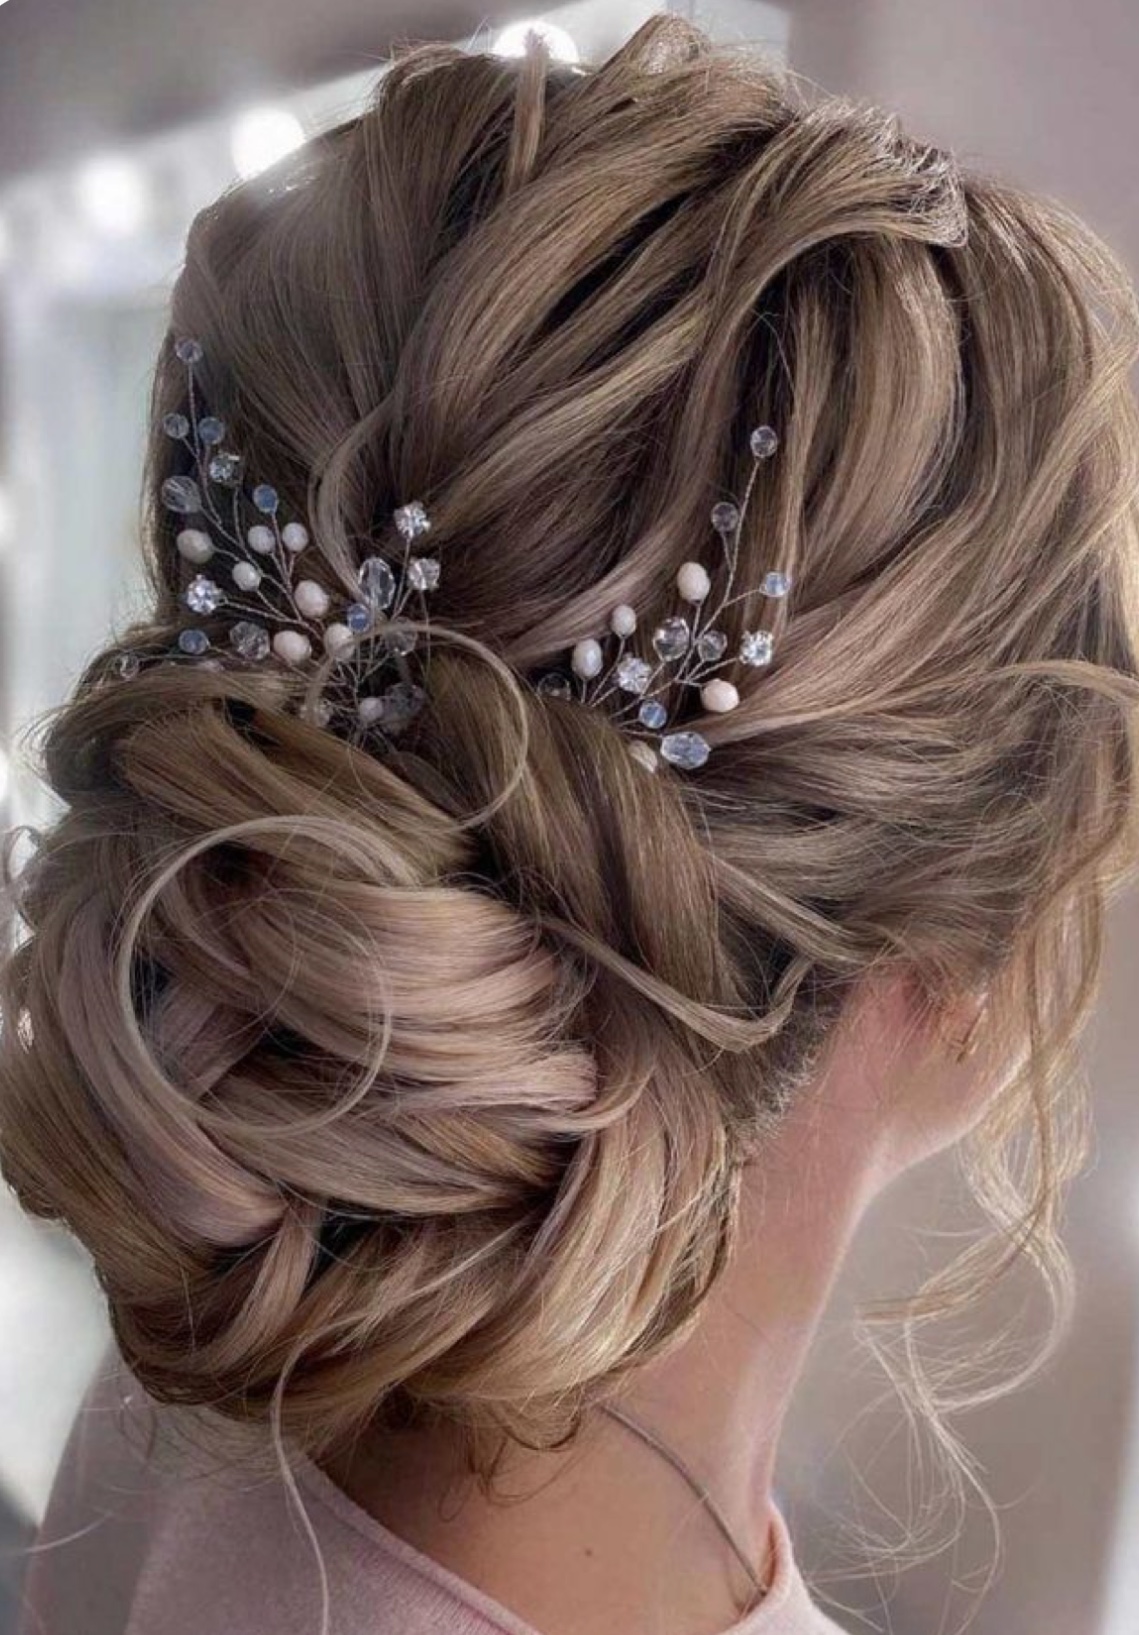 Down Hairstyle For Mother Of Groom